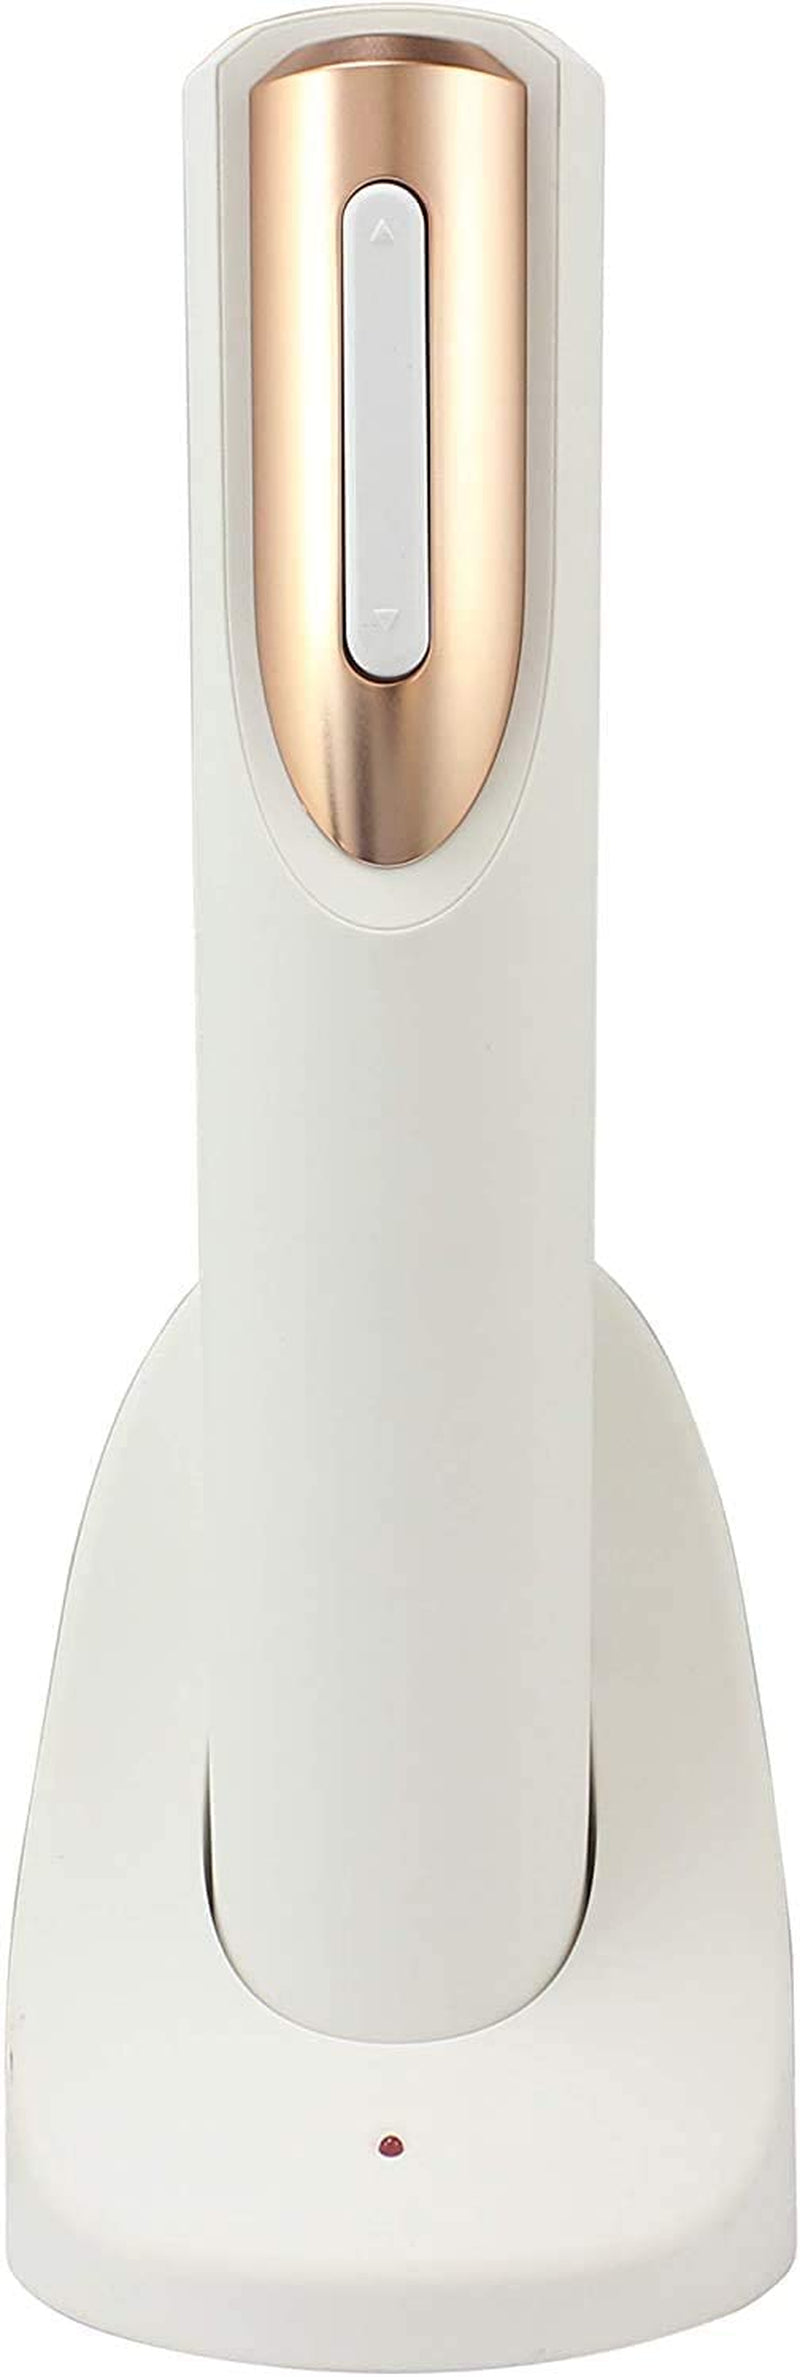 Electric Wine Opener with Charging Base & Foil Cutter - Automatic Wine Bottle Opener - Electric Corkscrew Wine Opener - Electric Wine Bottle Opener Rechargeable Wine Gift for Wine Lovers